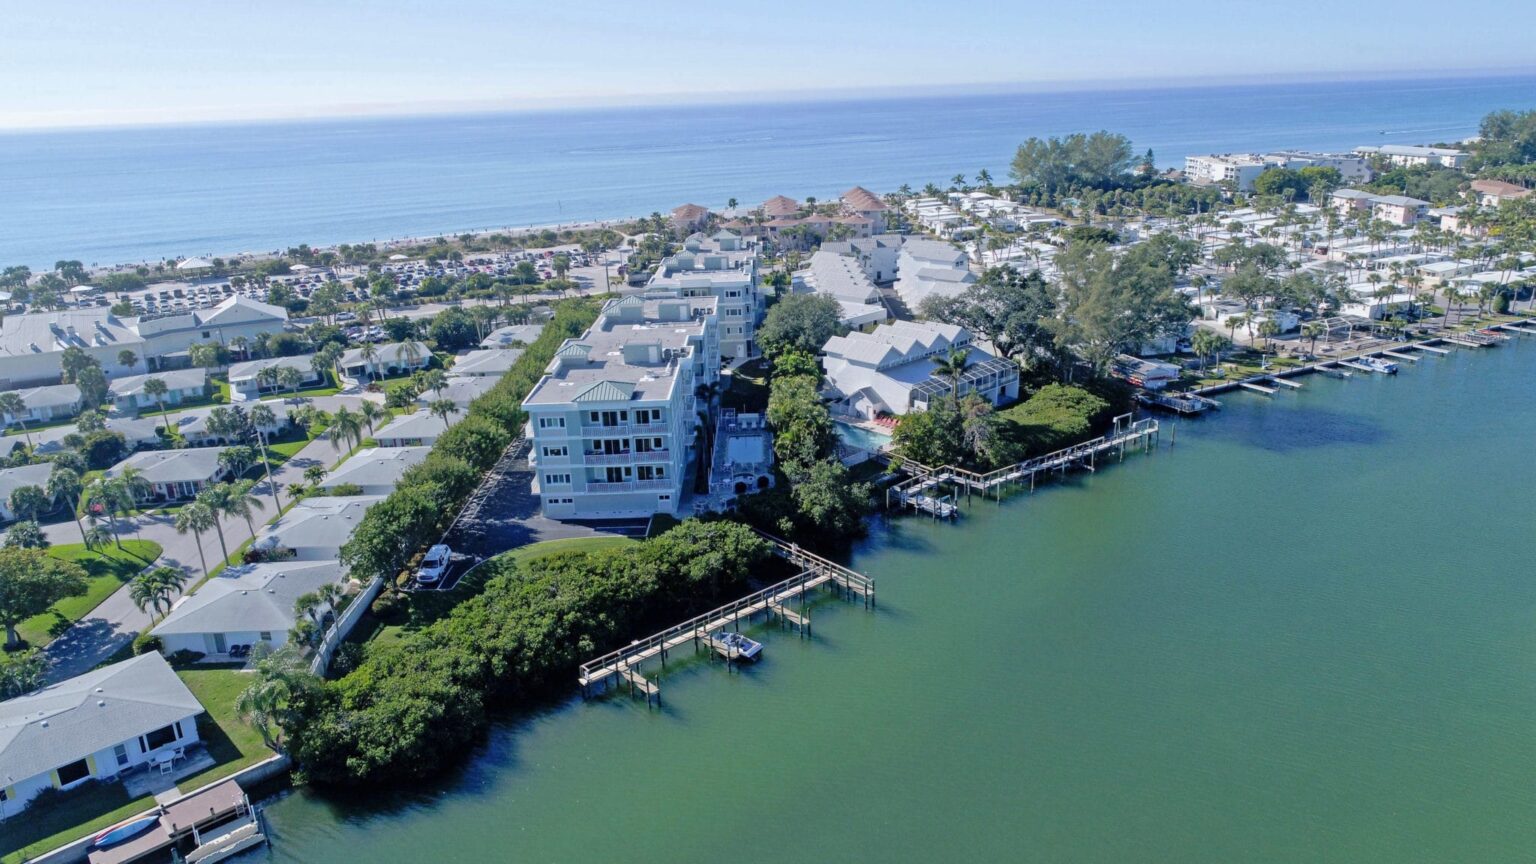 aerial of Sunrise Pointe condominium buildings with Intracoastal in foreground and beach in background